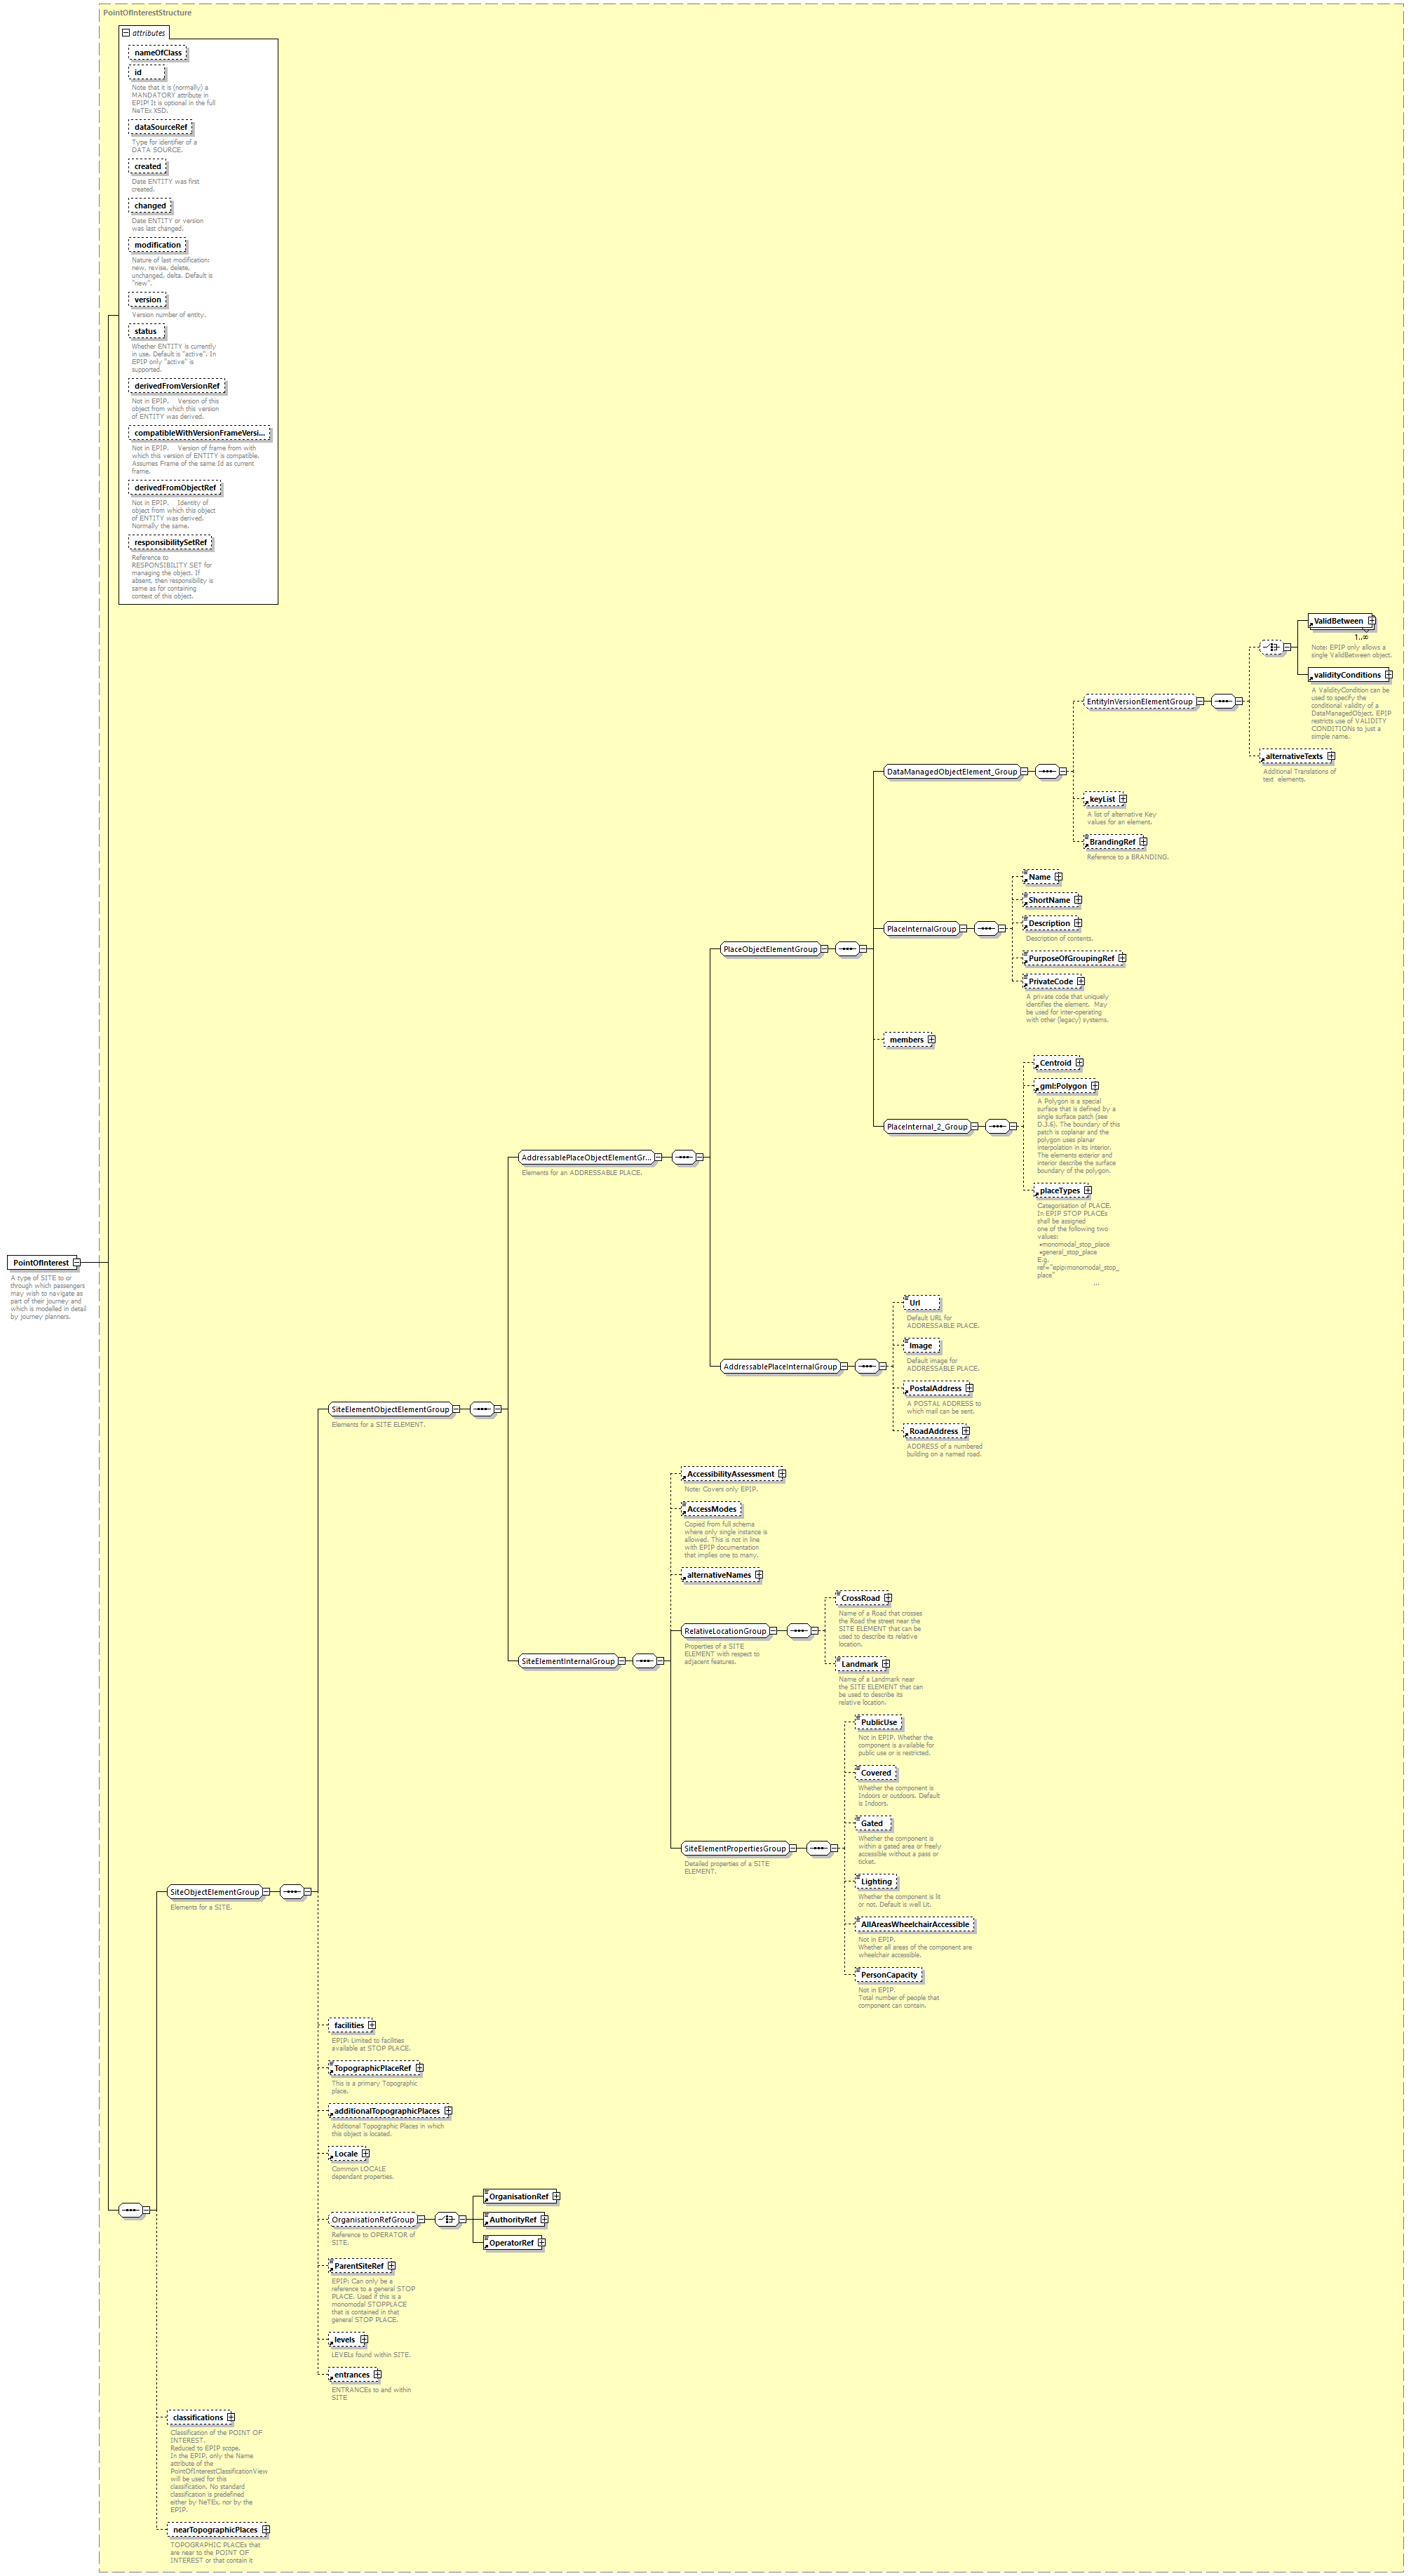 reduced_diagrams/reduced_p329.png